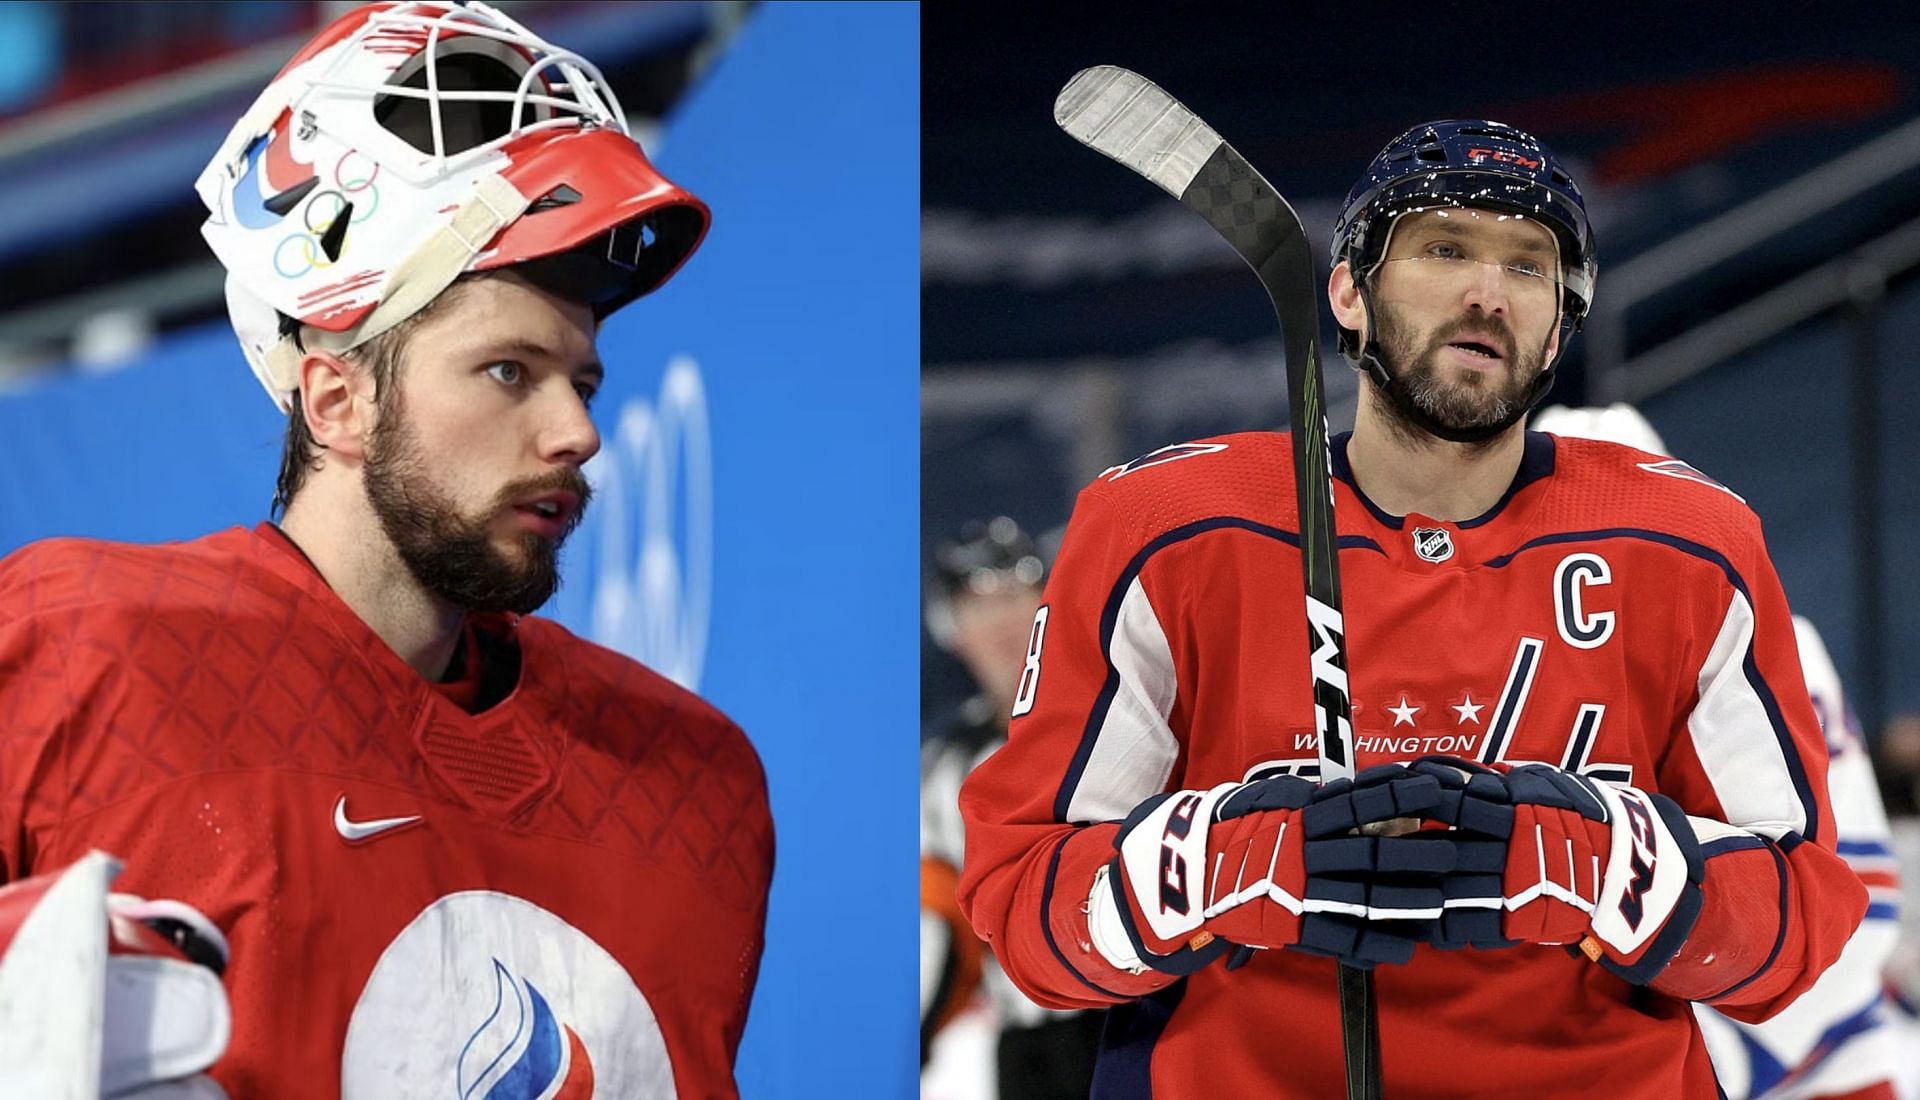 Alex Ovechkin weighs in on Ivan Fedotov